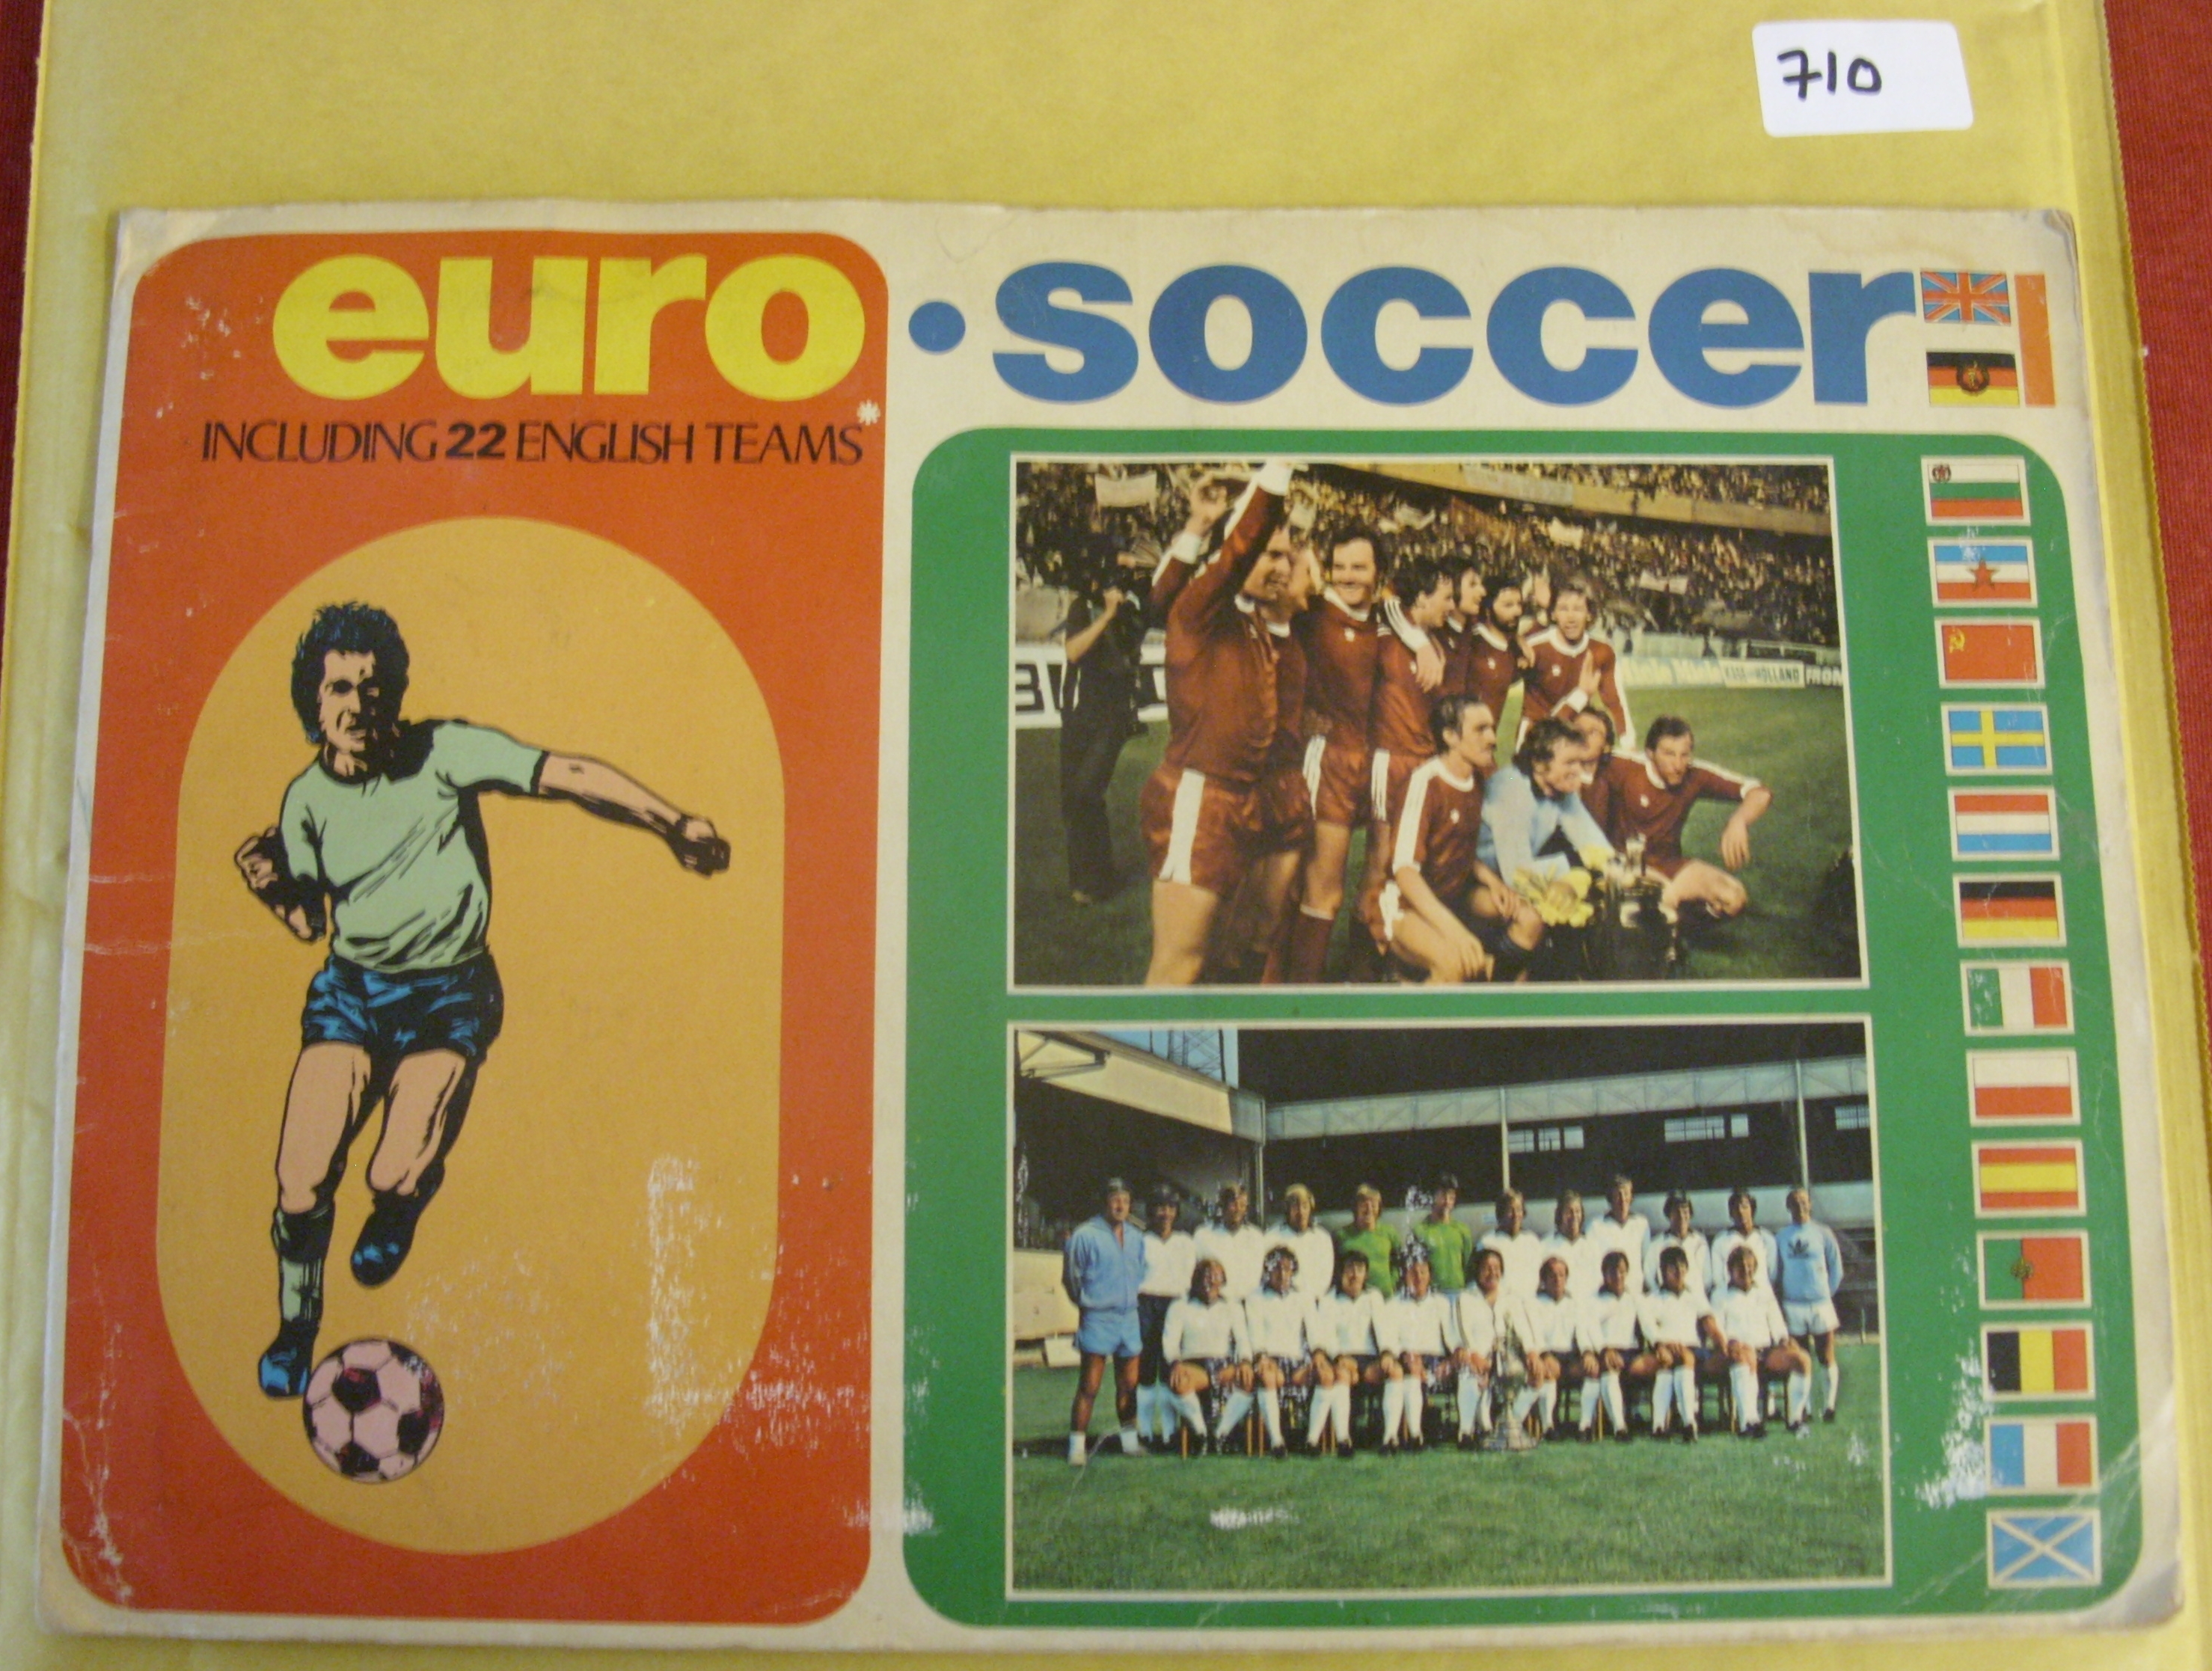 1975 The Euro Soccer Postcard Collection, in original album, as issued by FKS Publishers, included i